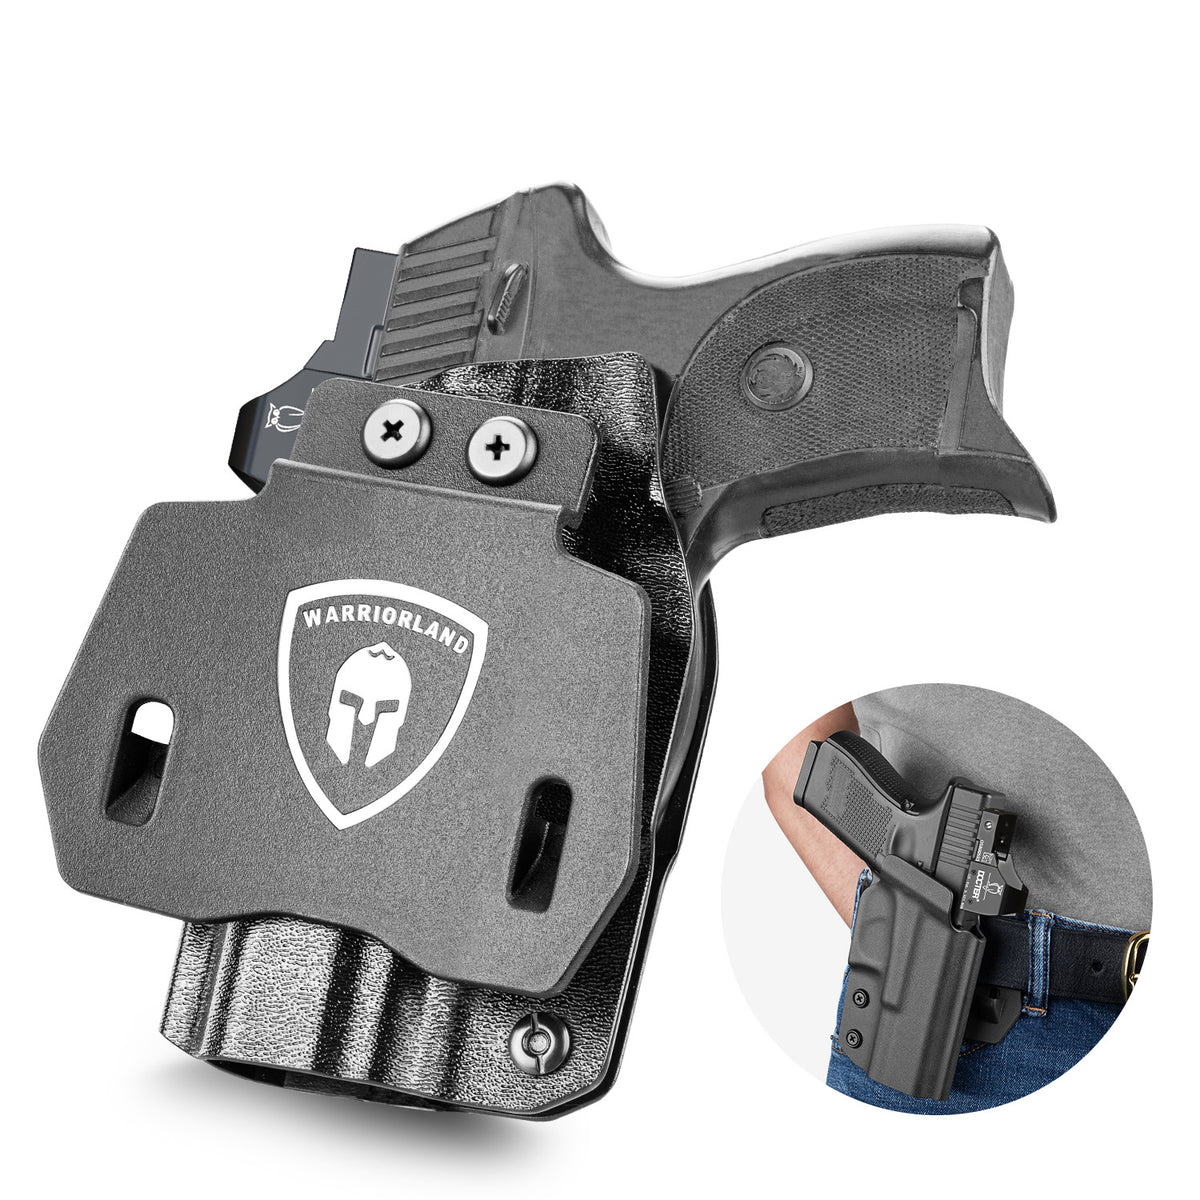 OWB Holster Optics Cut Fit Ruger Max-9 Pistol, Outside Waistband Open Carry Max 9 Holster with 1.75 Inch Paddle, Adj. Retention & Cant, Right Hand|WARRIORLAND